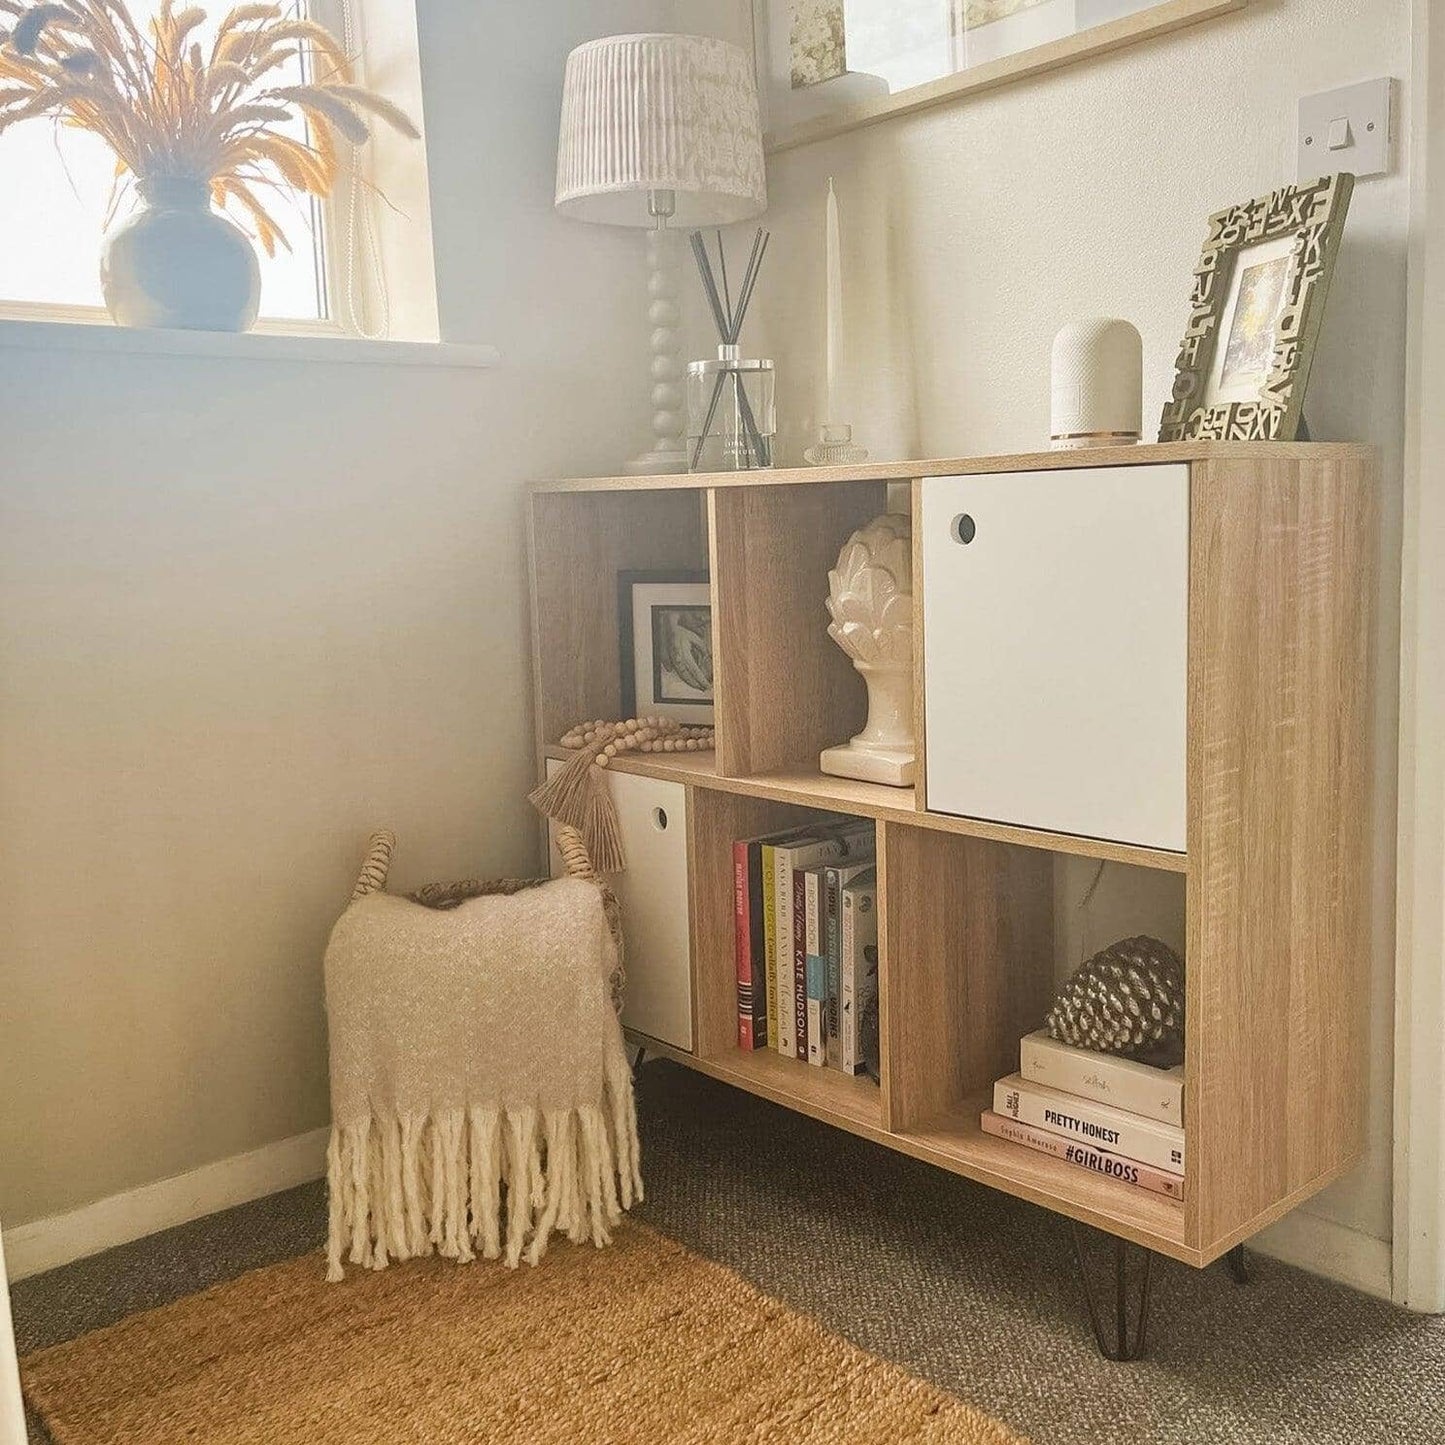 Anderson cube storage unit - Oak effect with white cupboards - Laura James